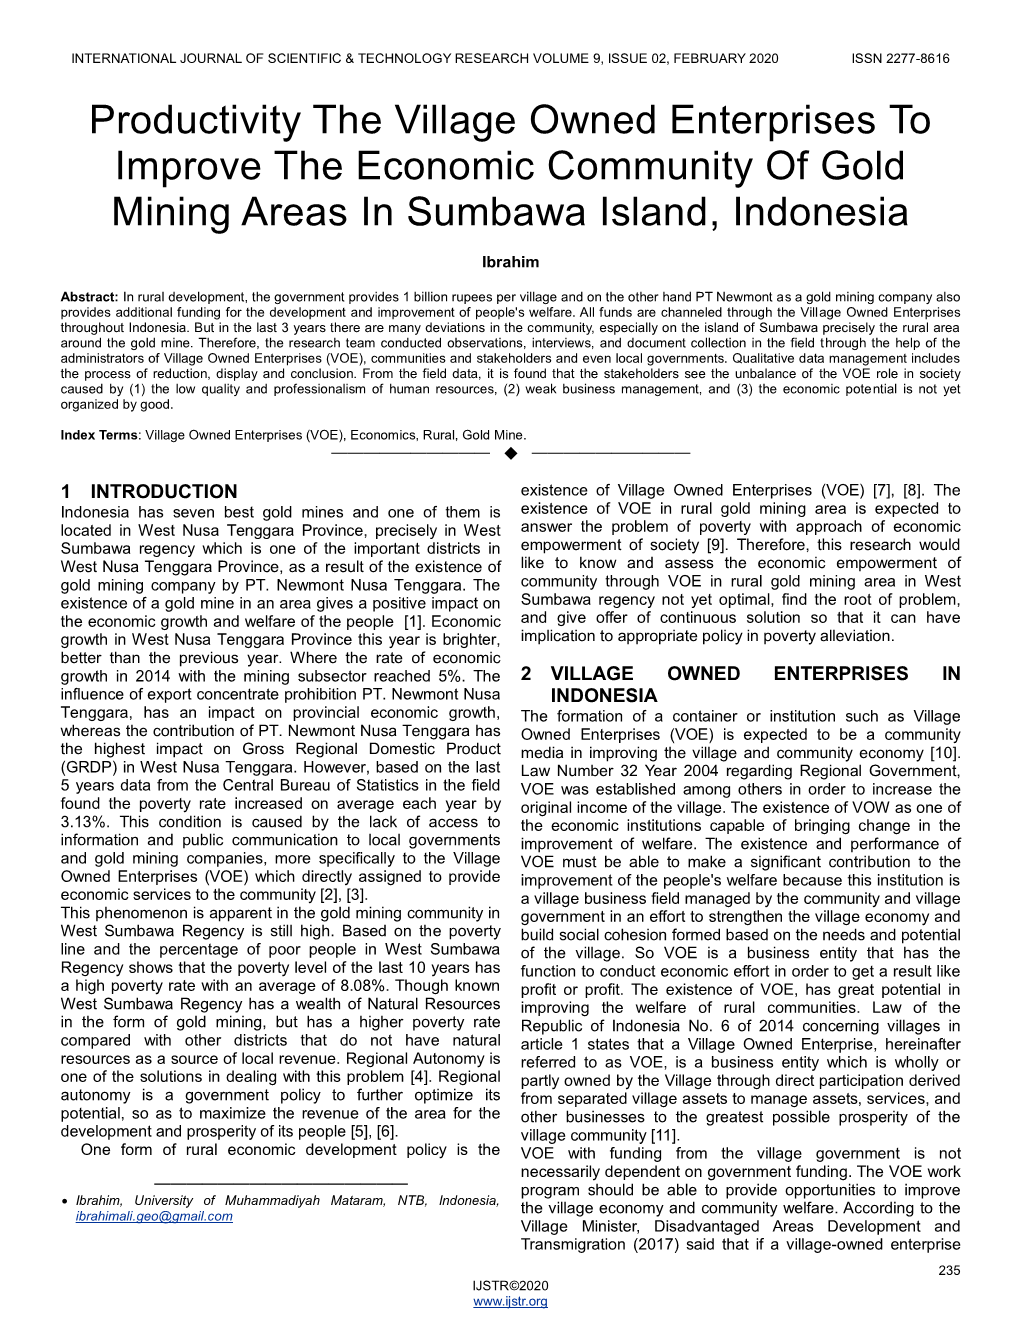 Productivity the Village Owned Enterprises to Improve the Economic Community of Gold Mining Areas in Sumbawa Island, Indonesia